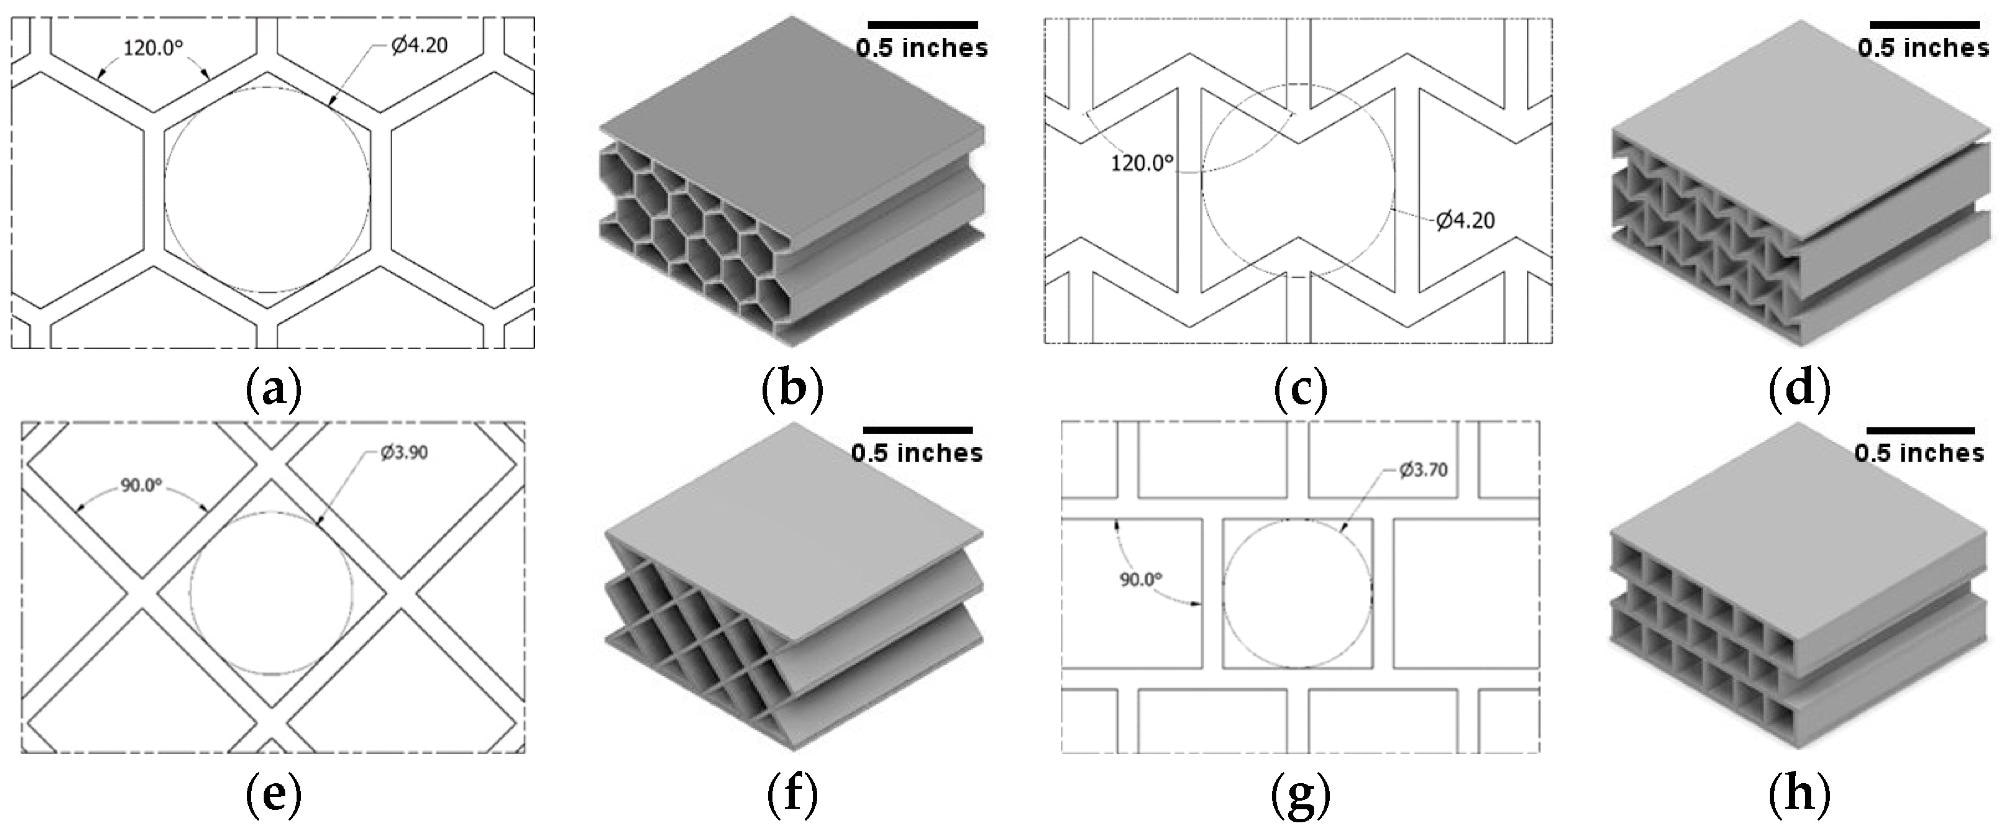 Design of unit cells of (a) honeycomb, (c) re-entrant honeycomb, (e) diamond, and (g) square. The wall thickness of all cellular walls and face walls is set to 0.5 mm. (b,d,f,h) are the complete CAD drawings of sandwich panels with different cellular structures.